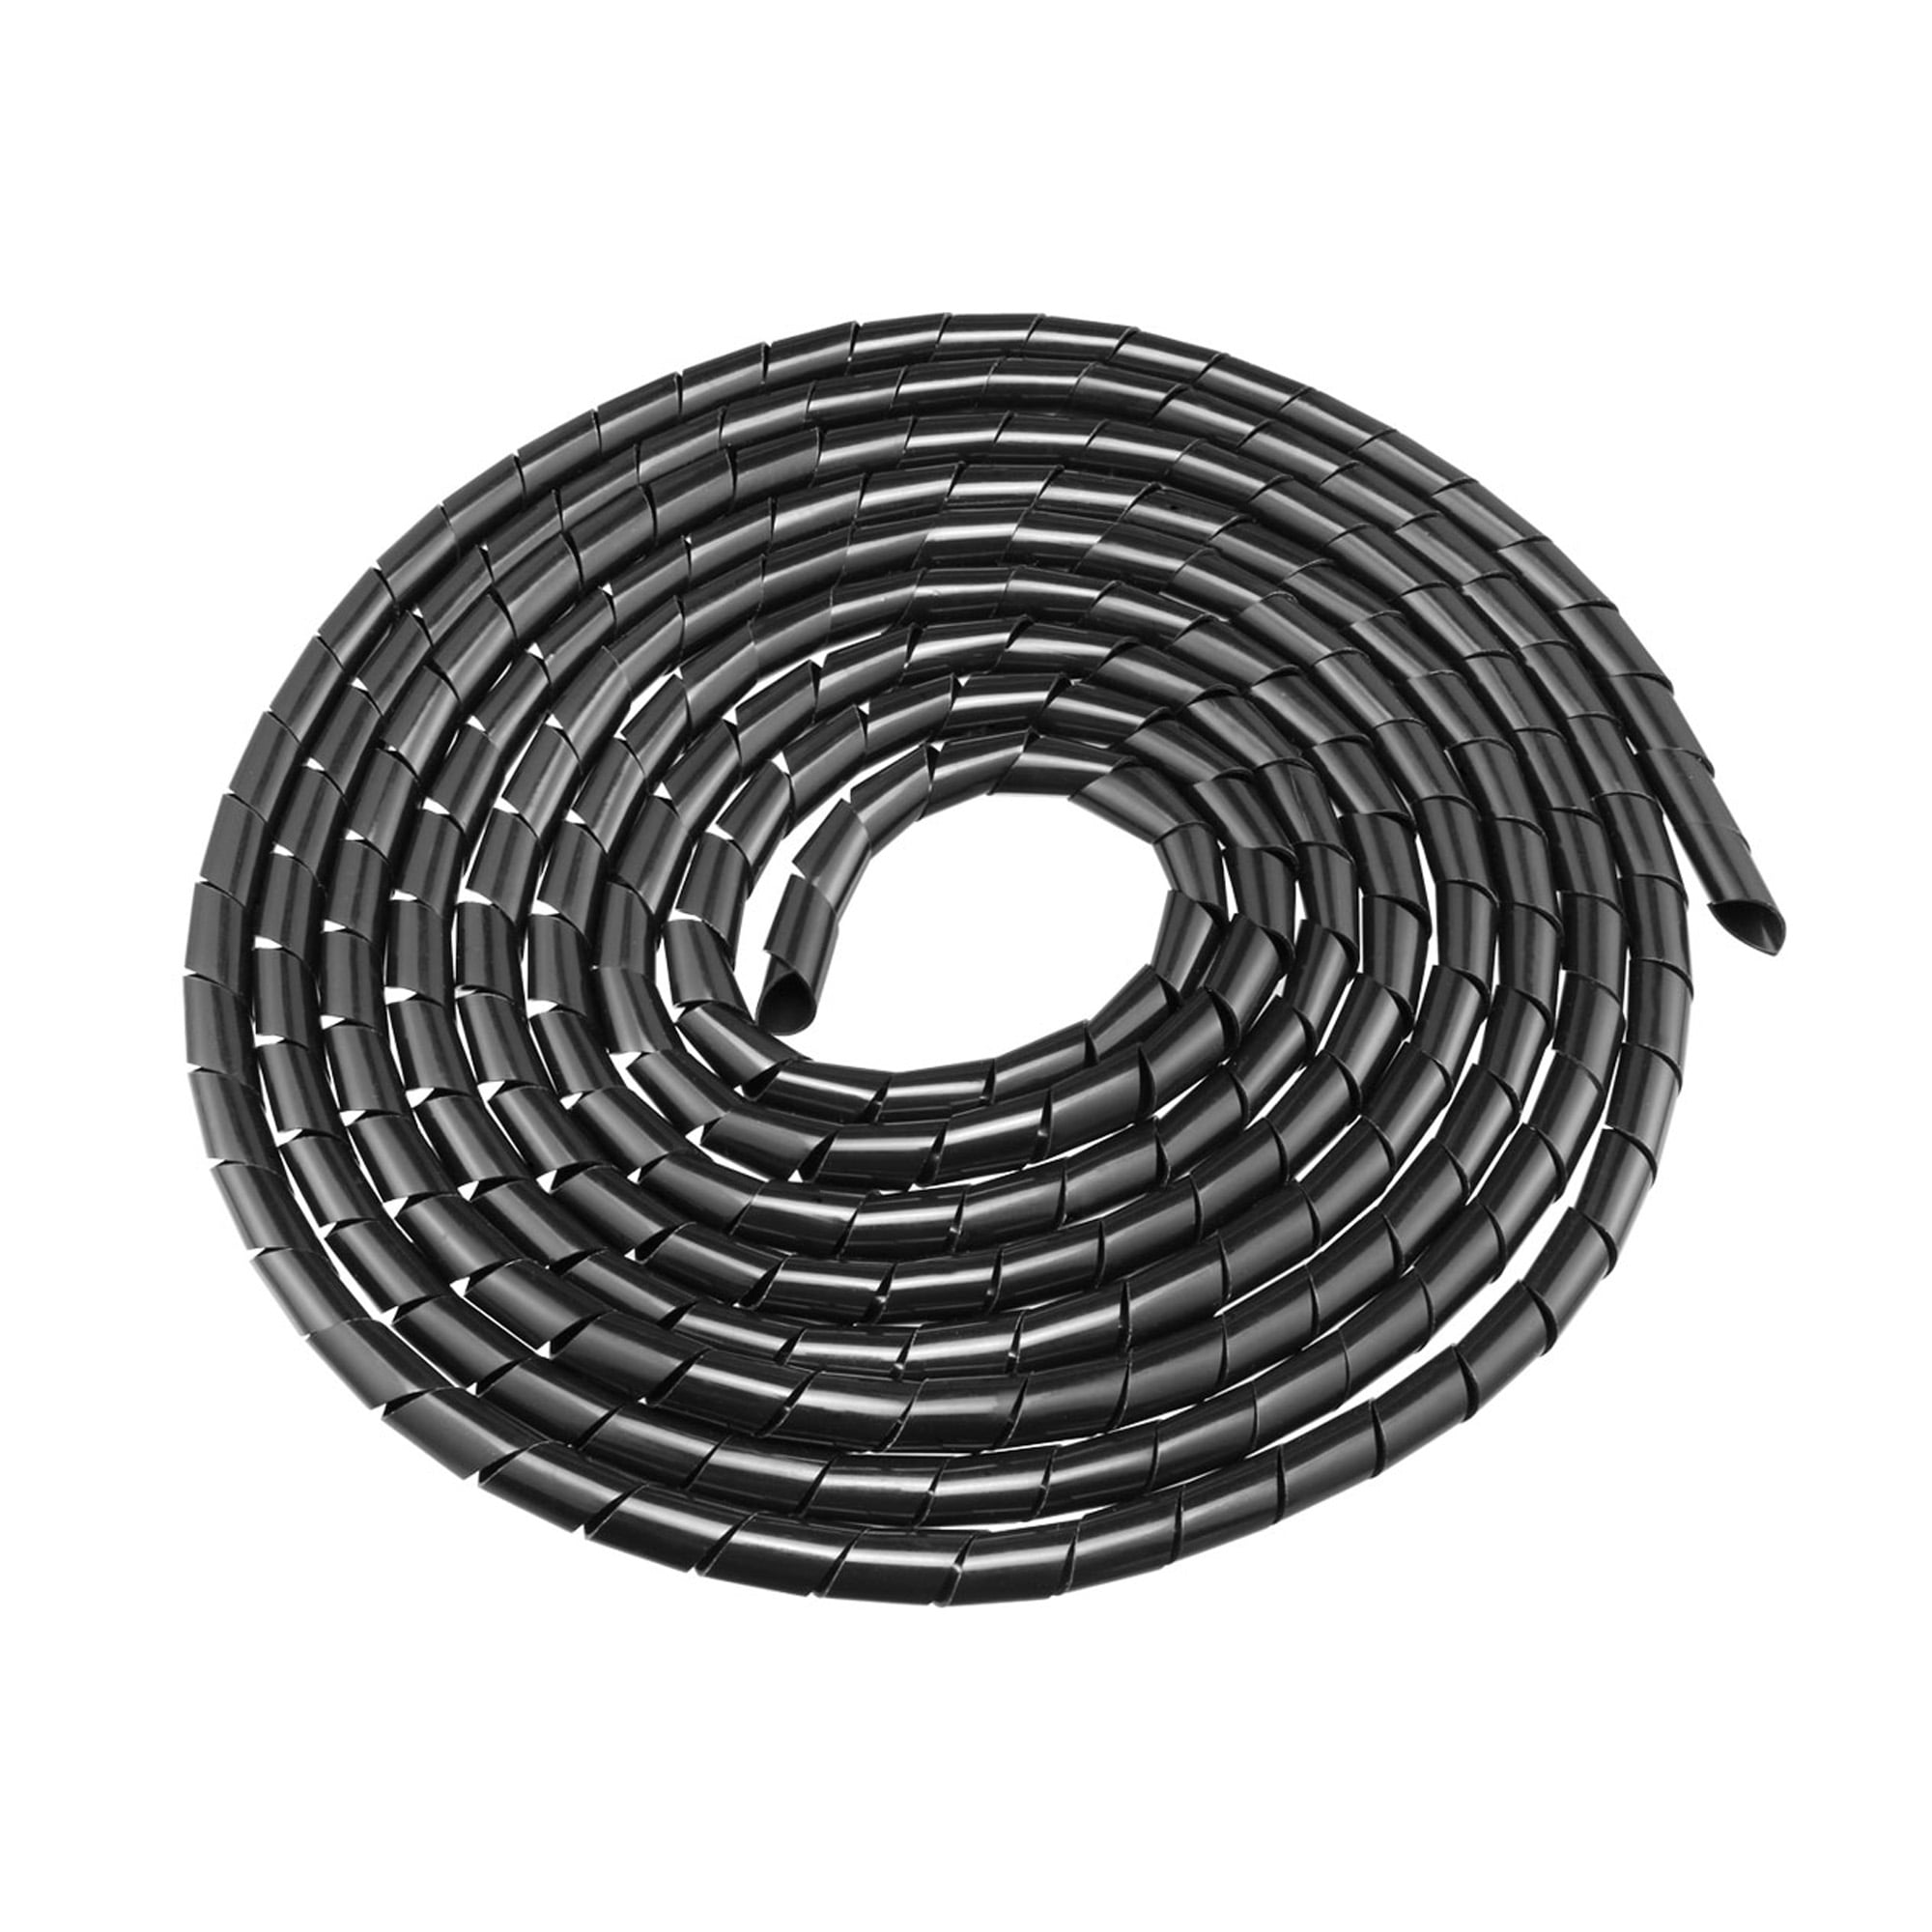 Cable Wire Wrap Expandable  Flat Sleeving Black 7mm Width 15M 49.2ft